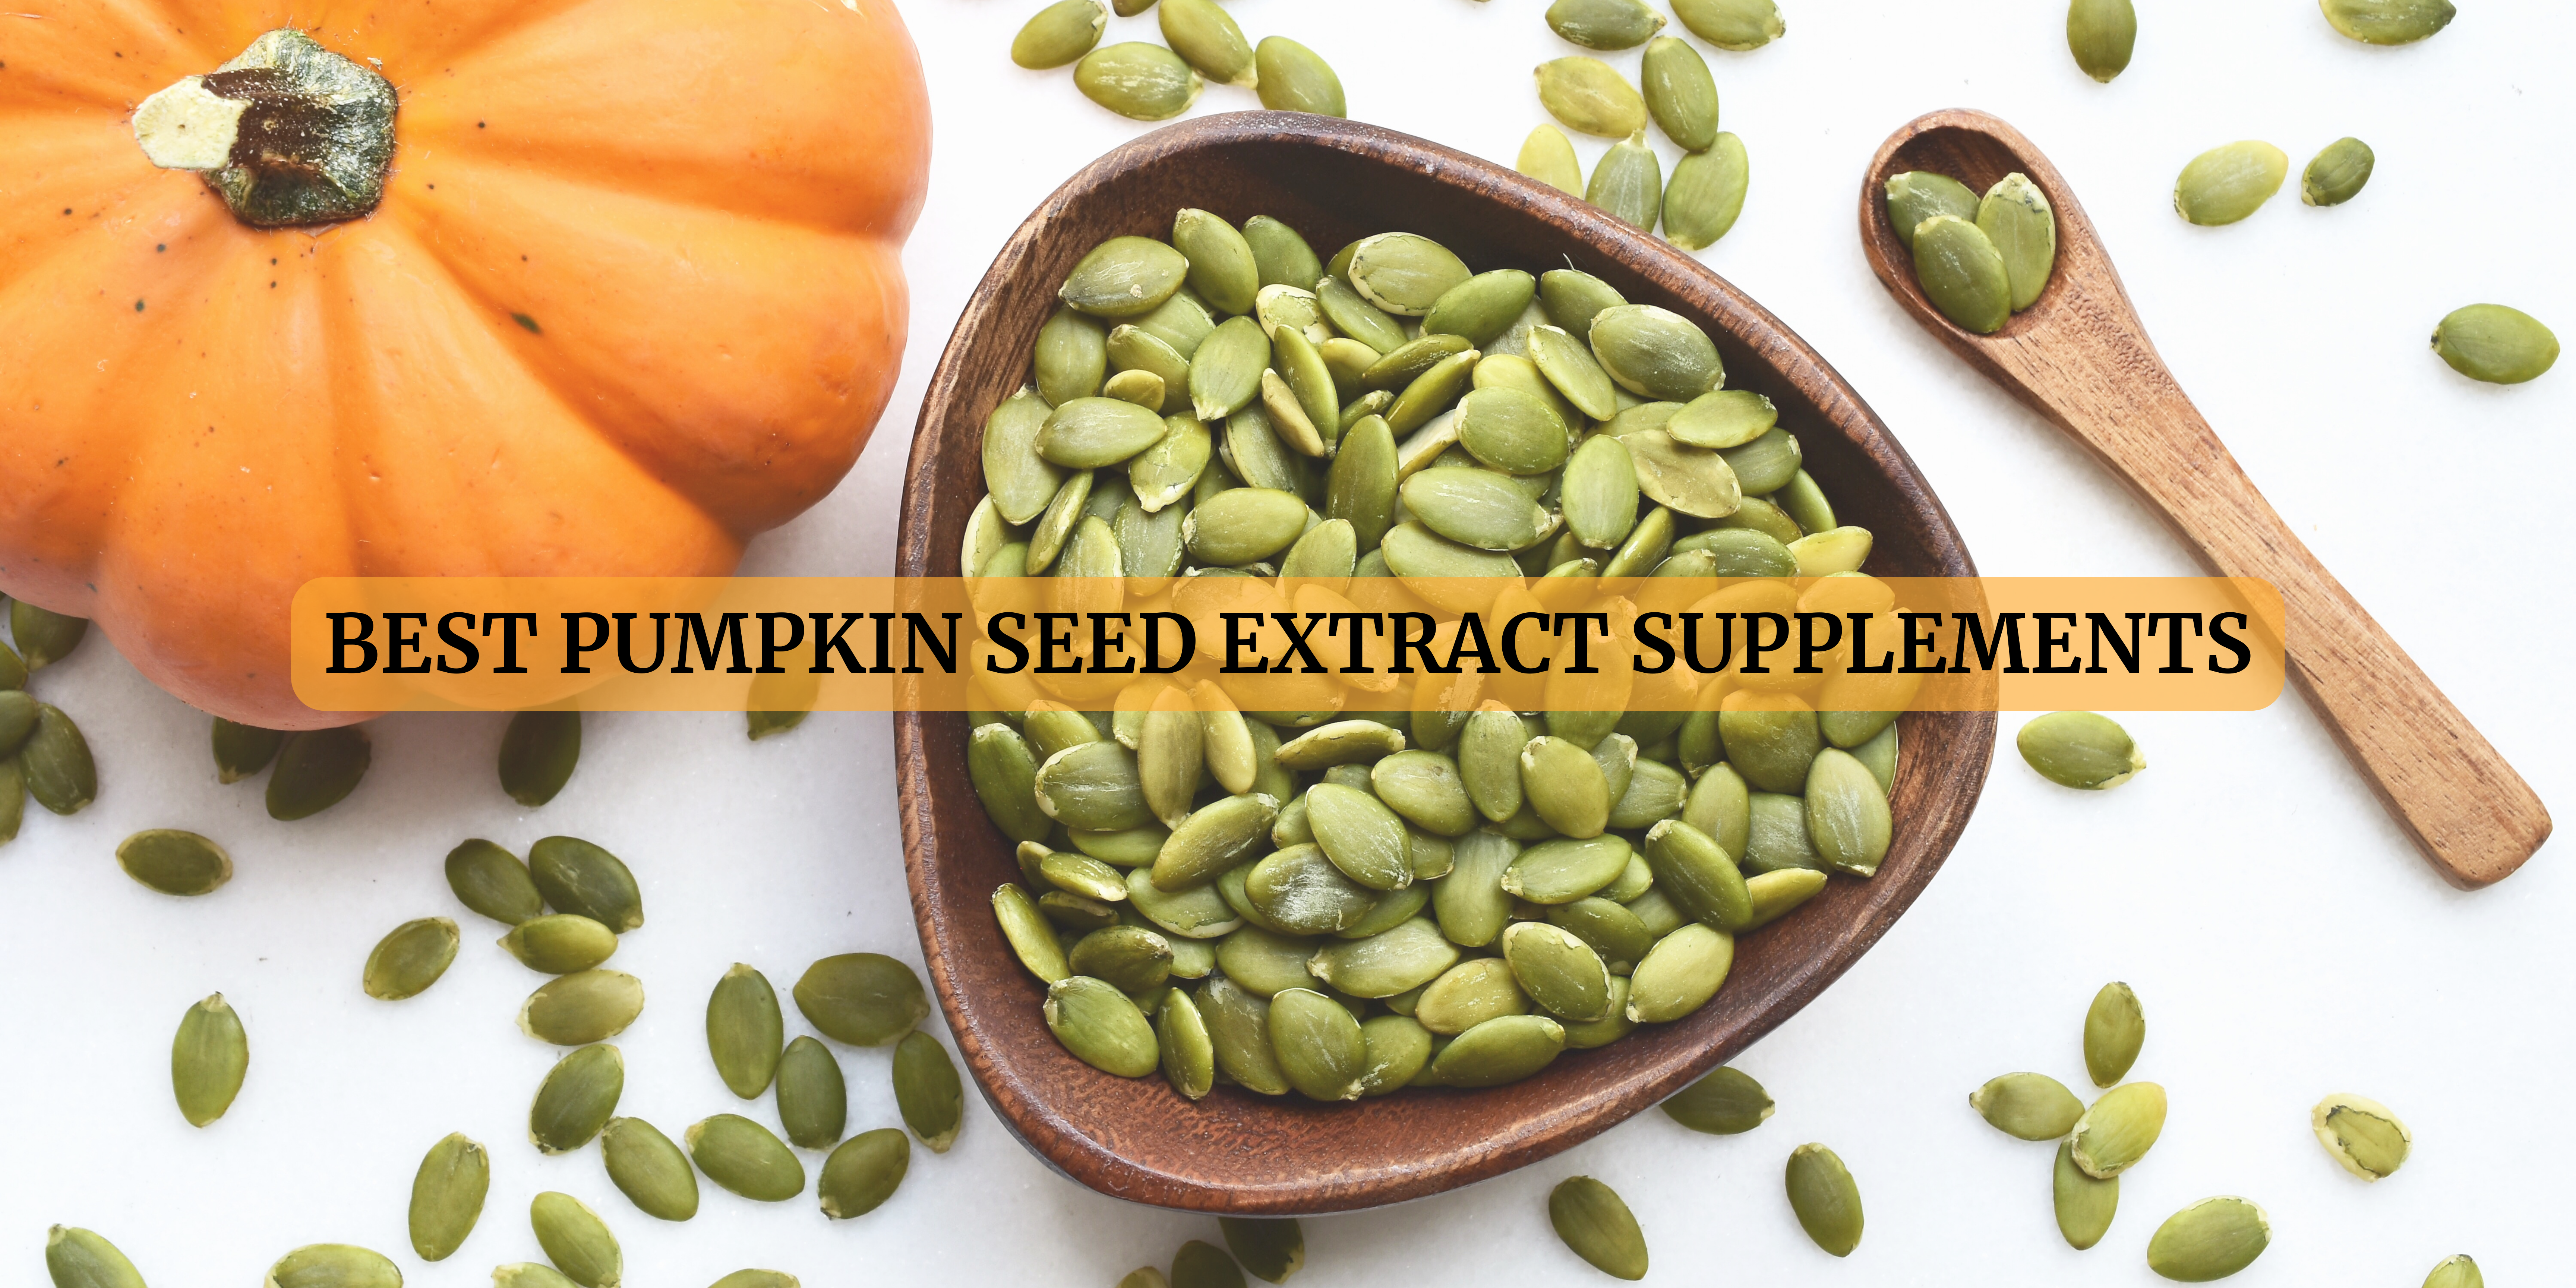 pumpkin seed extract supplements in Italy